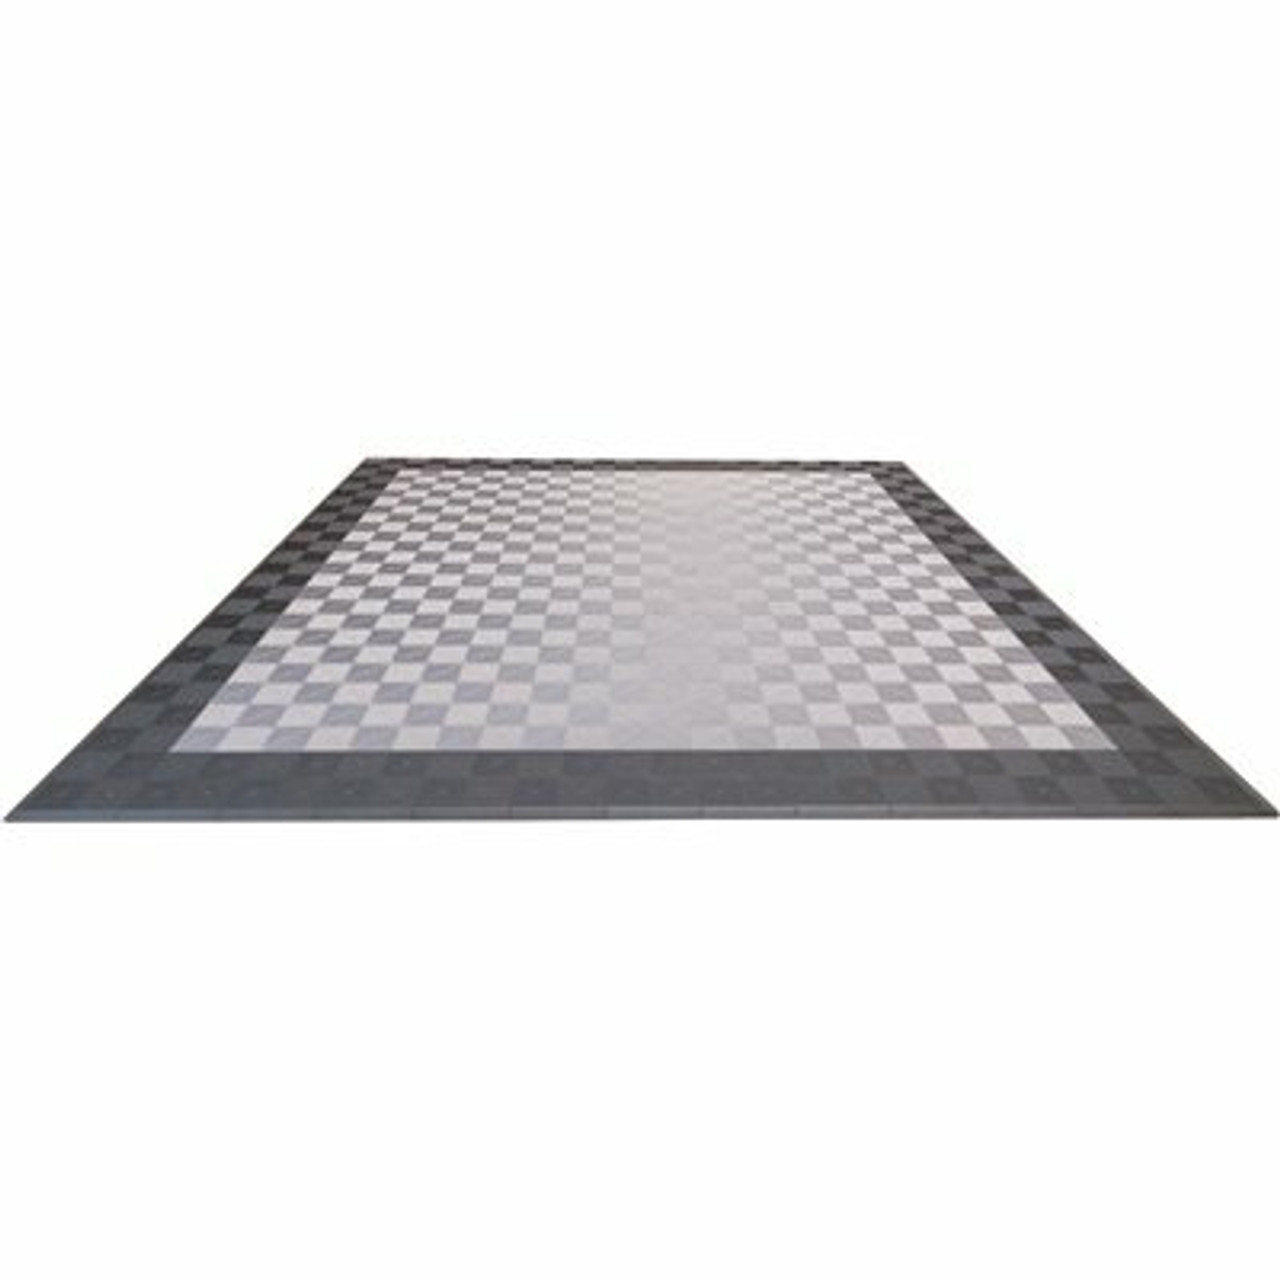 Swisstrax Grey And Silver Double Car Pad Ribtrax Modular Tile Flooring (268 Sq. Ft./Case)